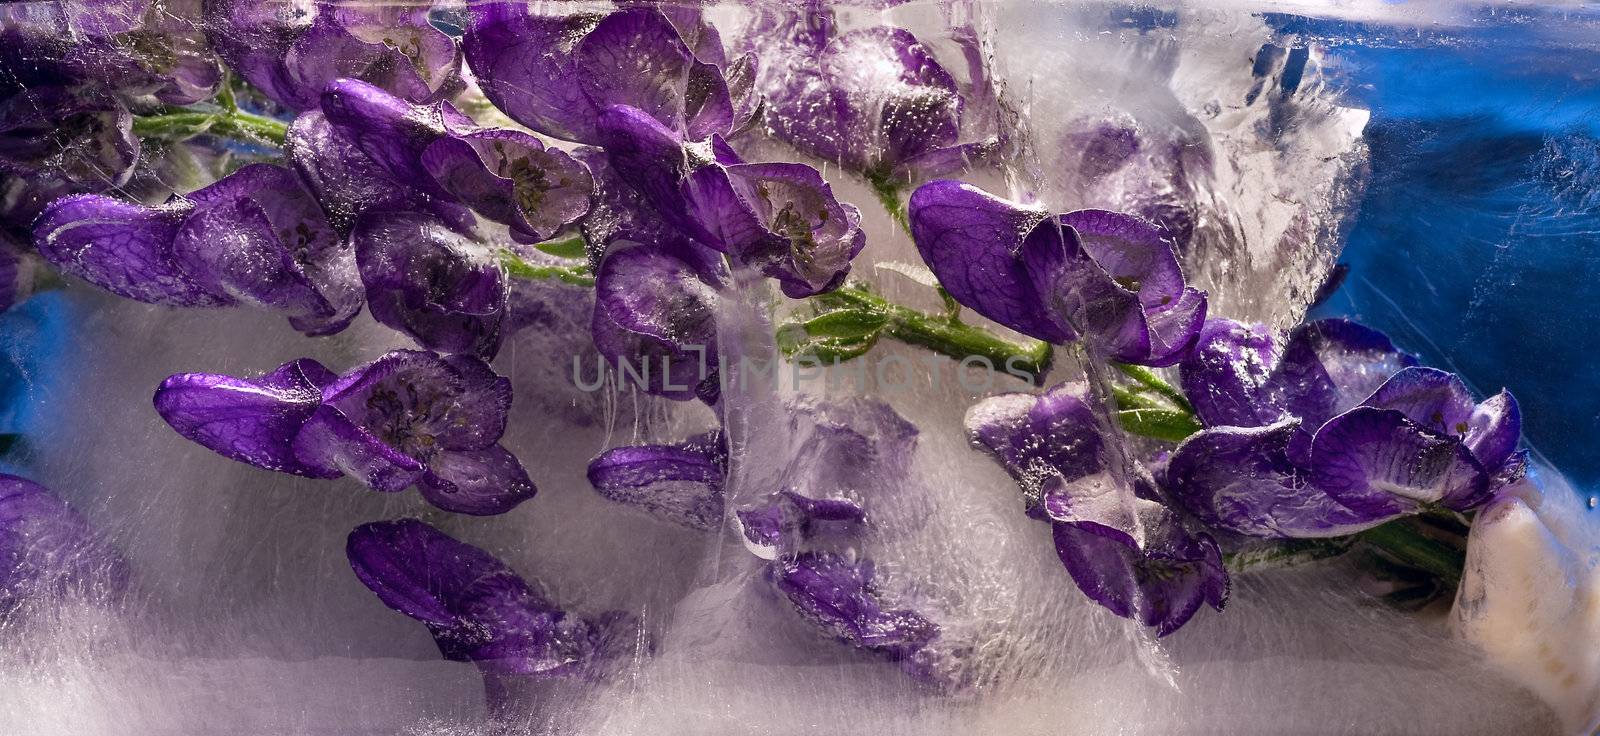 Background of aconite flower frozen in ice  by foryouinf